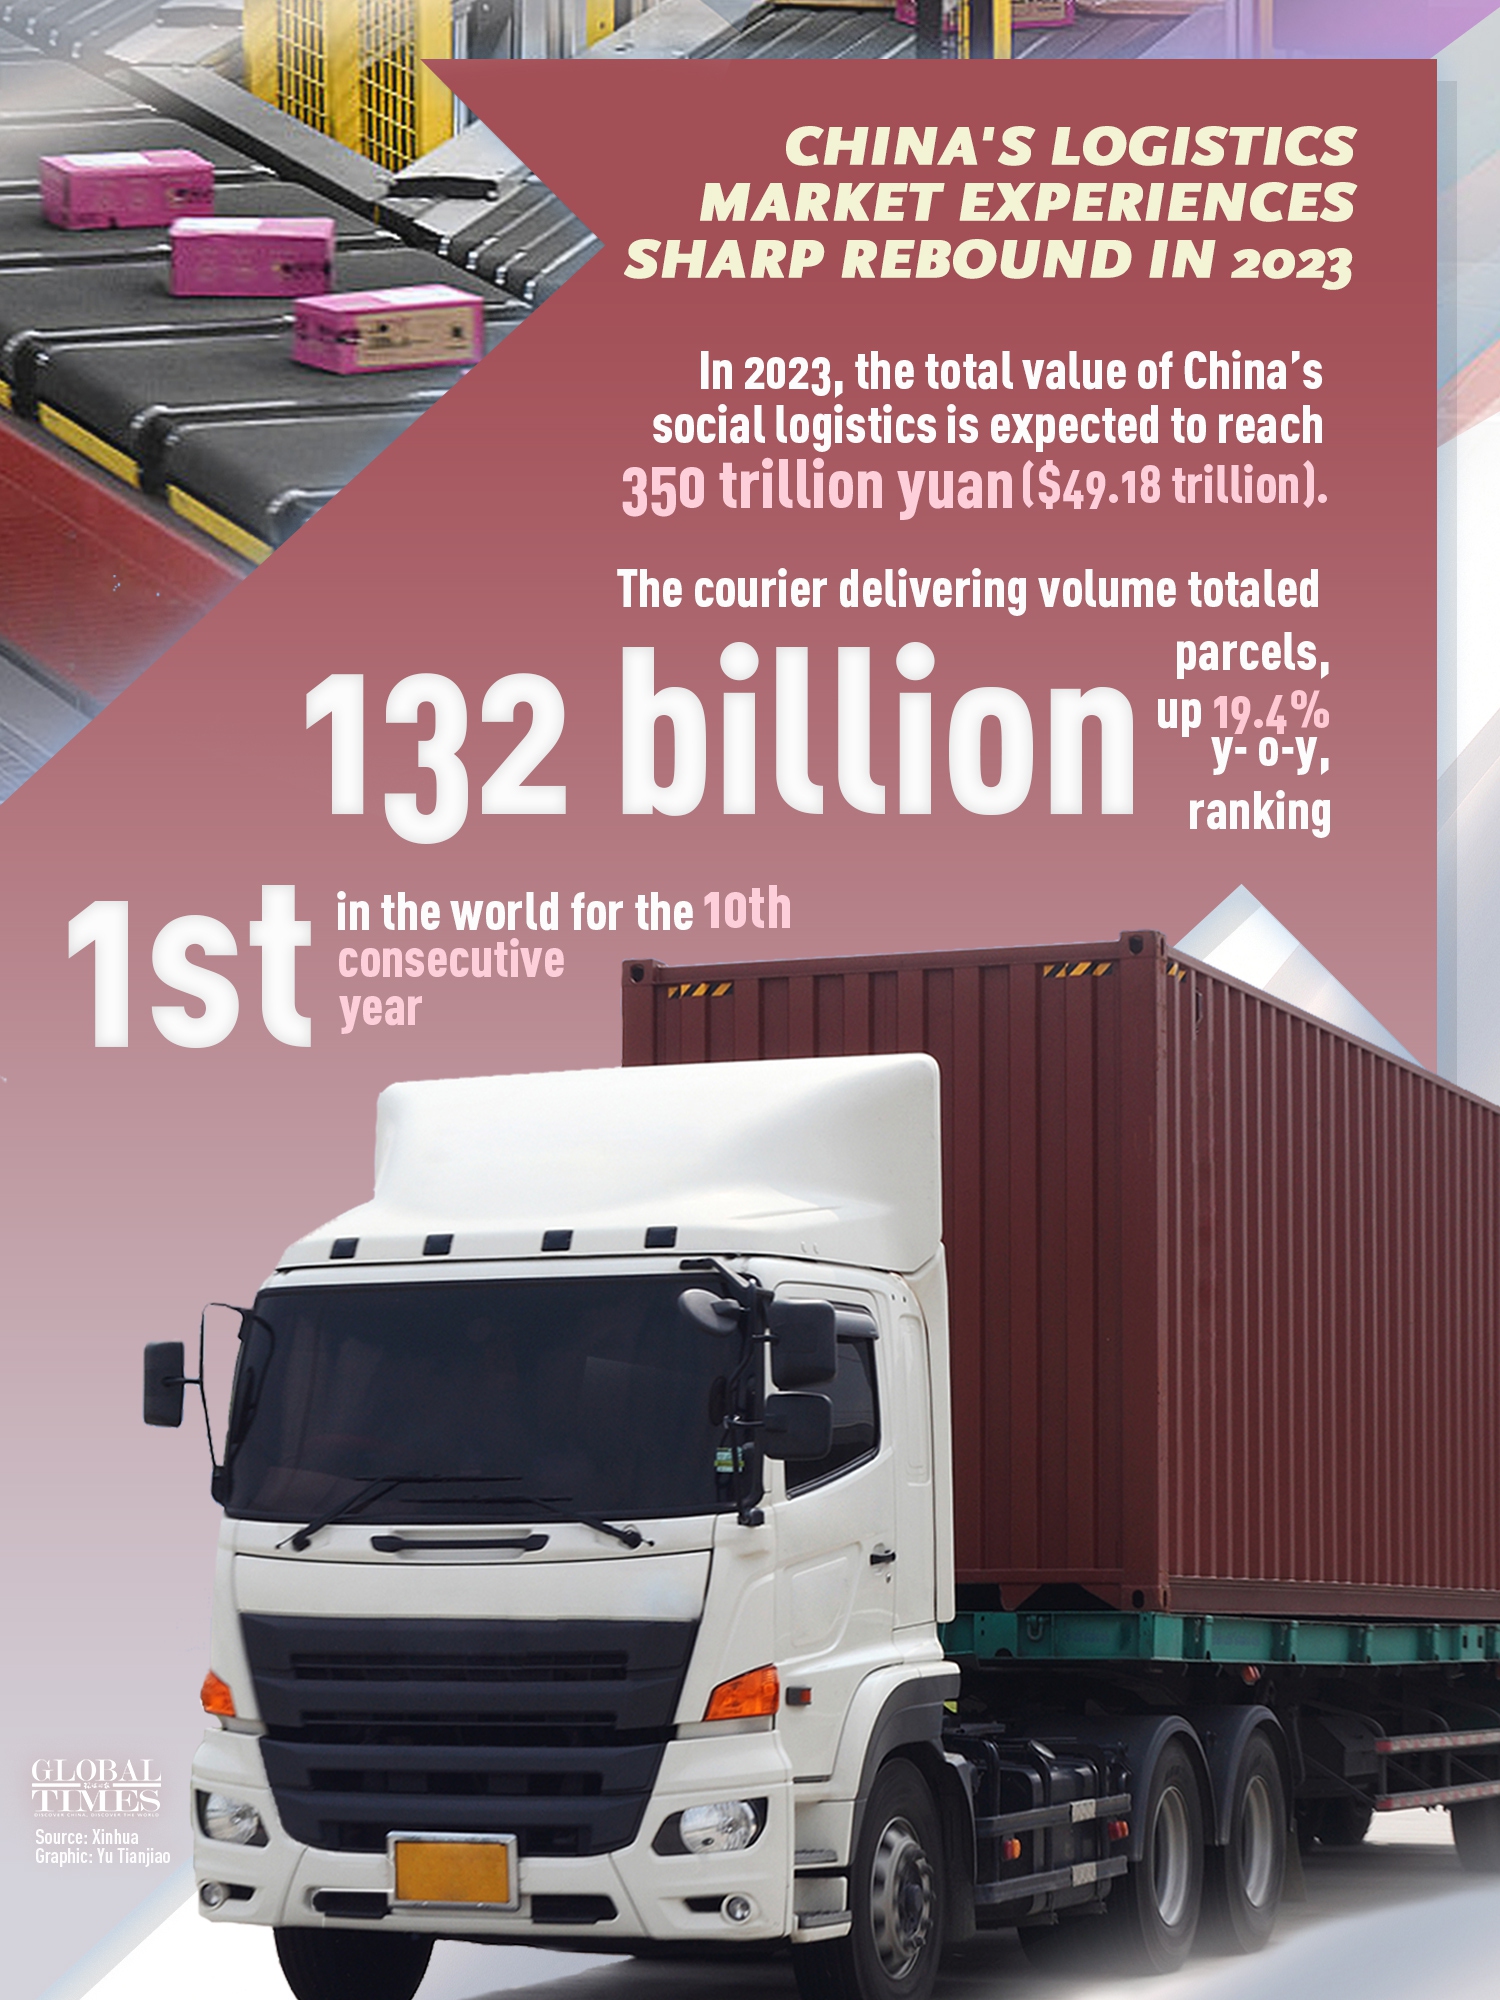 China's logistics market experienced a sharp rebound in 2023, with courier delivery volume hitting 132 billion parcels, ranking 1st in the world for the 10th consecutive year, according to the China Federation of Logistics and Purchasing.

